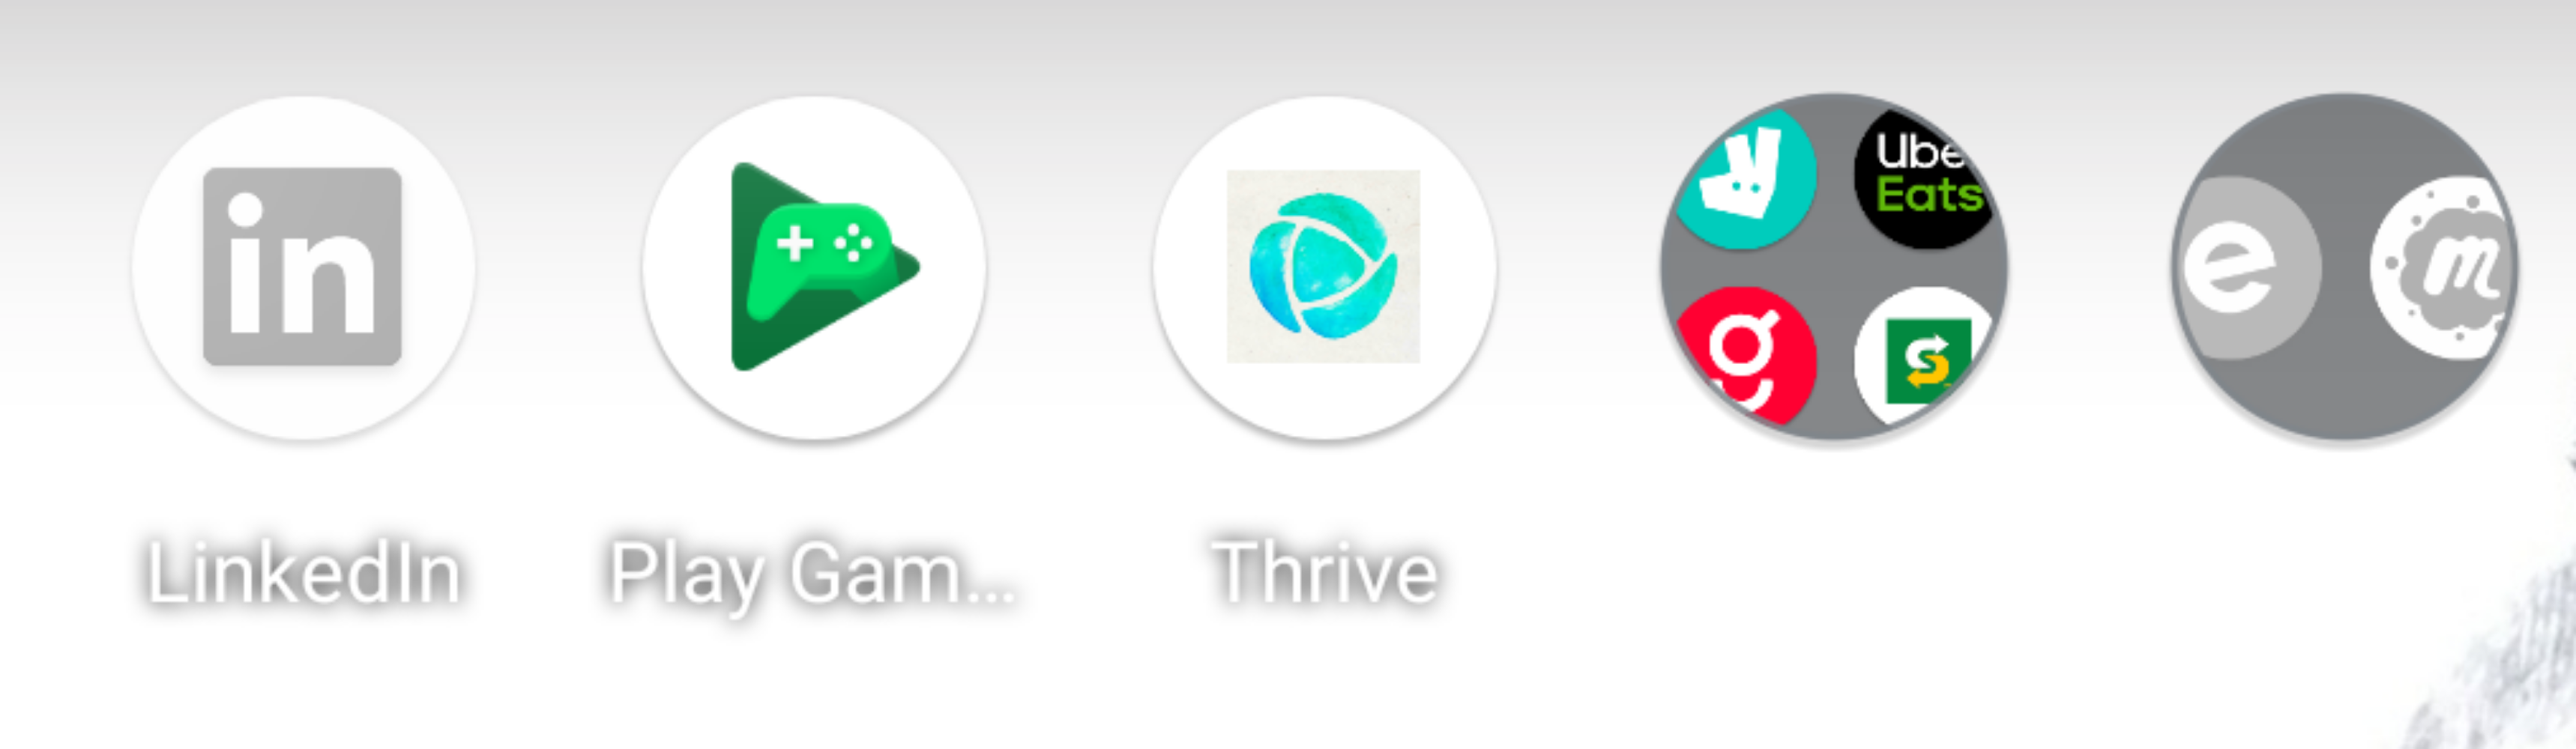 Apps that are disabled by Focus Mode have grey logos, whereas apps that are enabled have their regular colour logos